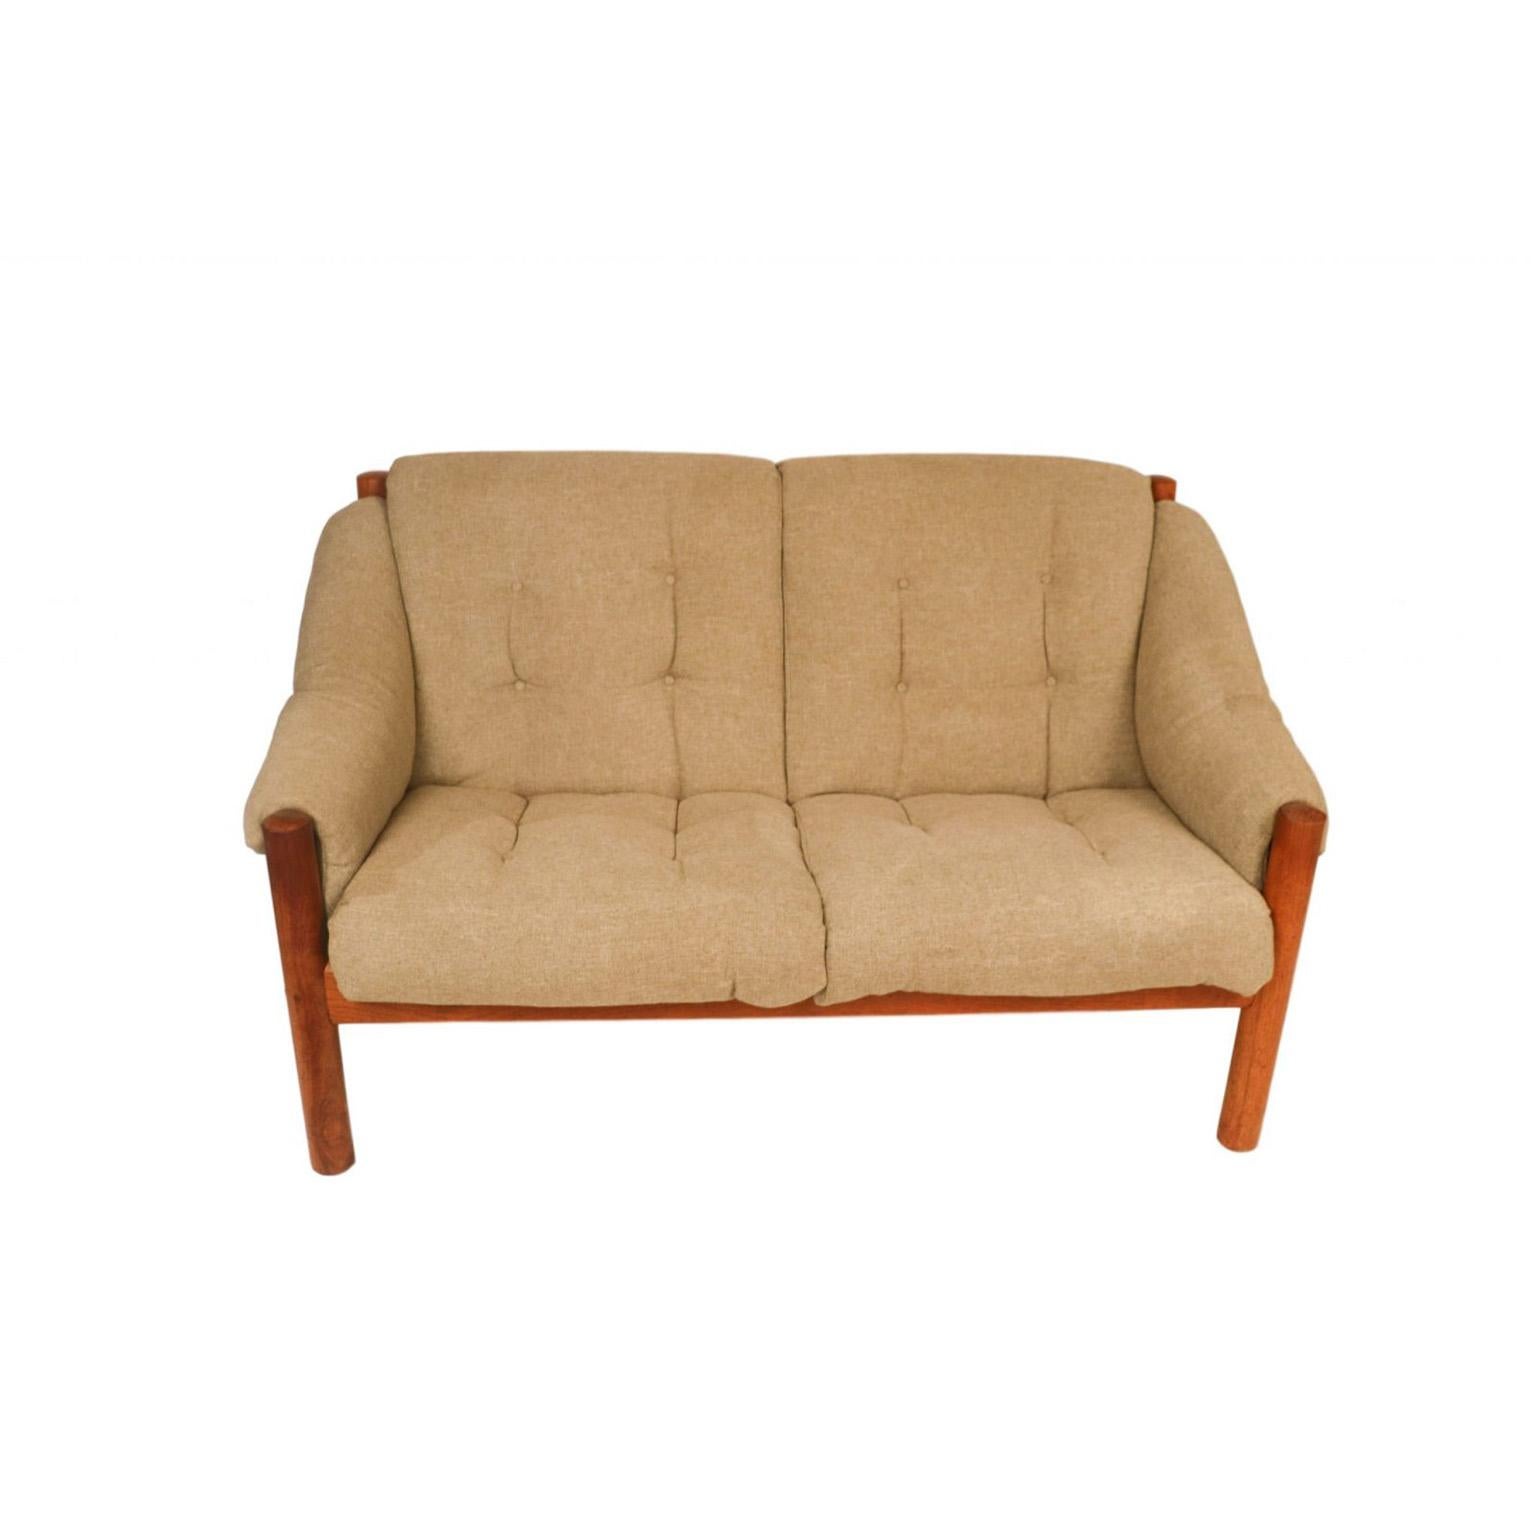 A stunning, comfortable, Mid-Century Modern, Danish 2-seat, teak sofa, settee, loveseat, from Domino Møbler, made in Denmark. An exceptional settee both for its form and quality. This loveseat embodies the whimsical fervour of the period, from